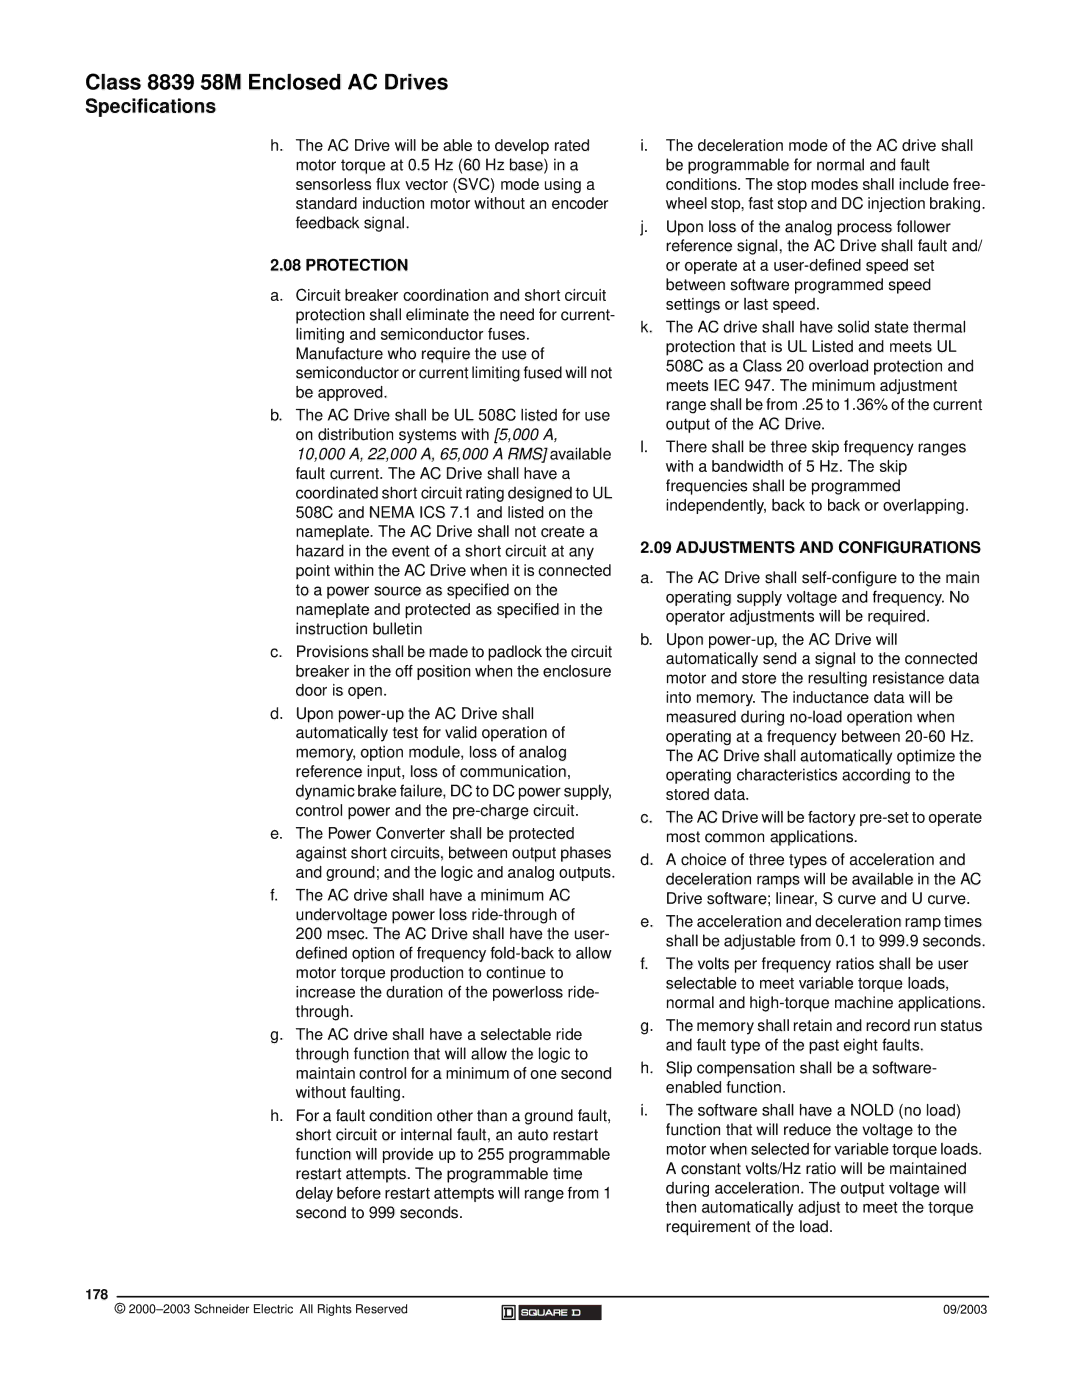 Schneider Electric 58 TRX manual Protection, Adjustments and Configurations, 178 